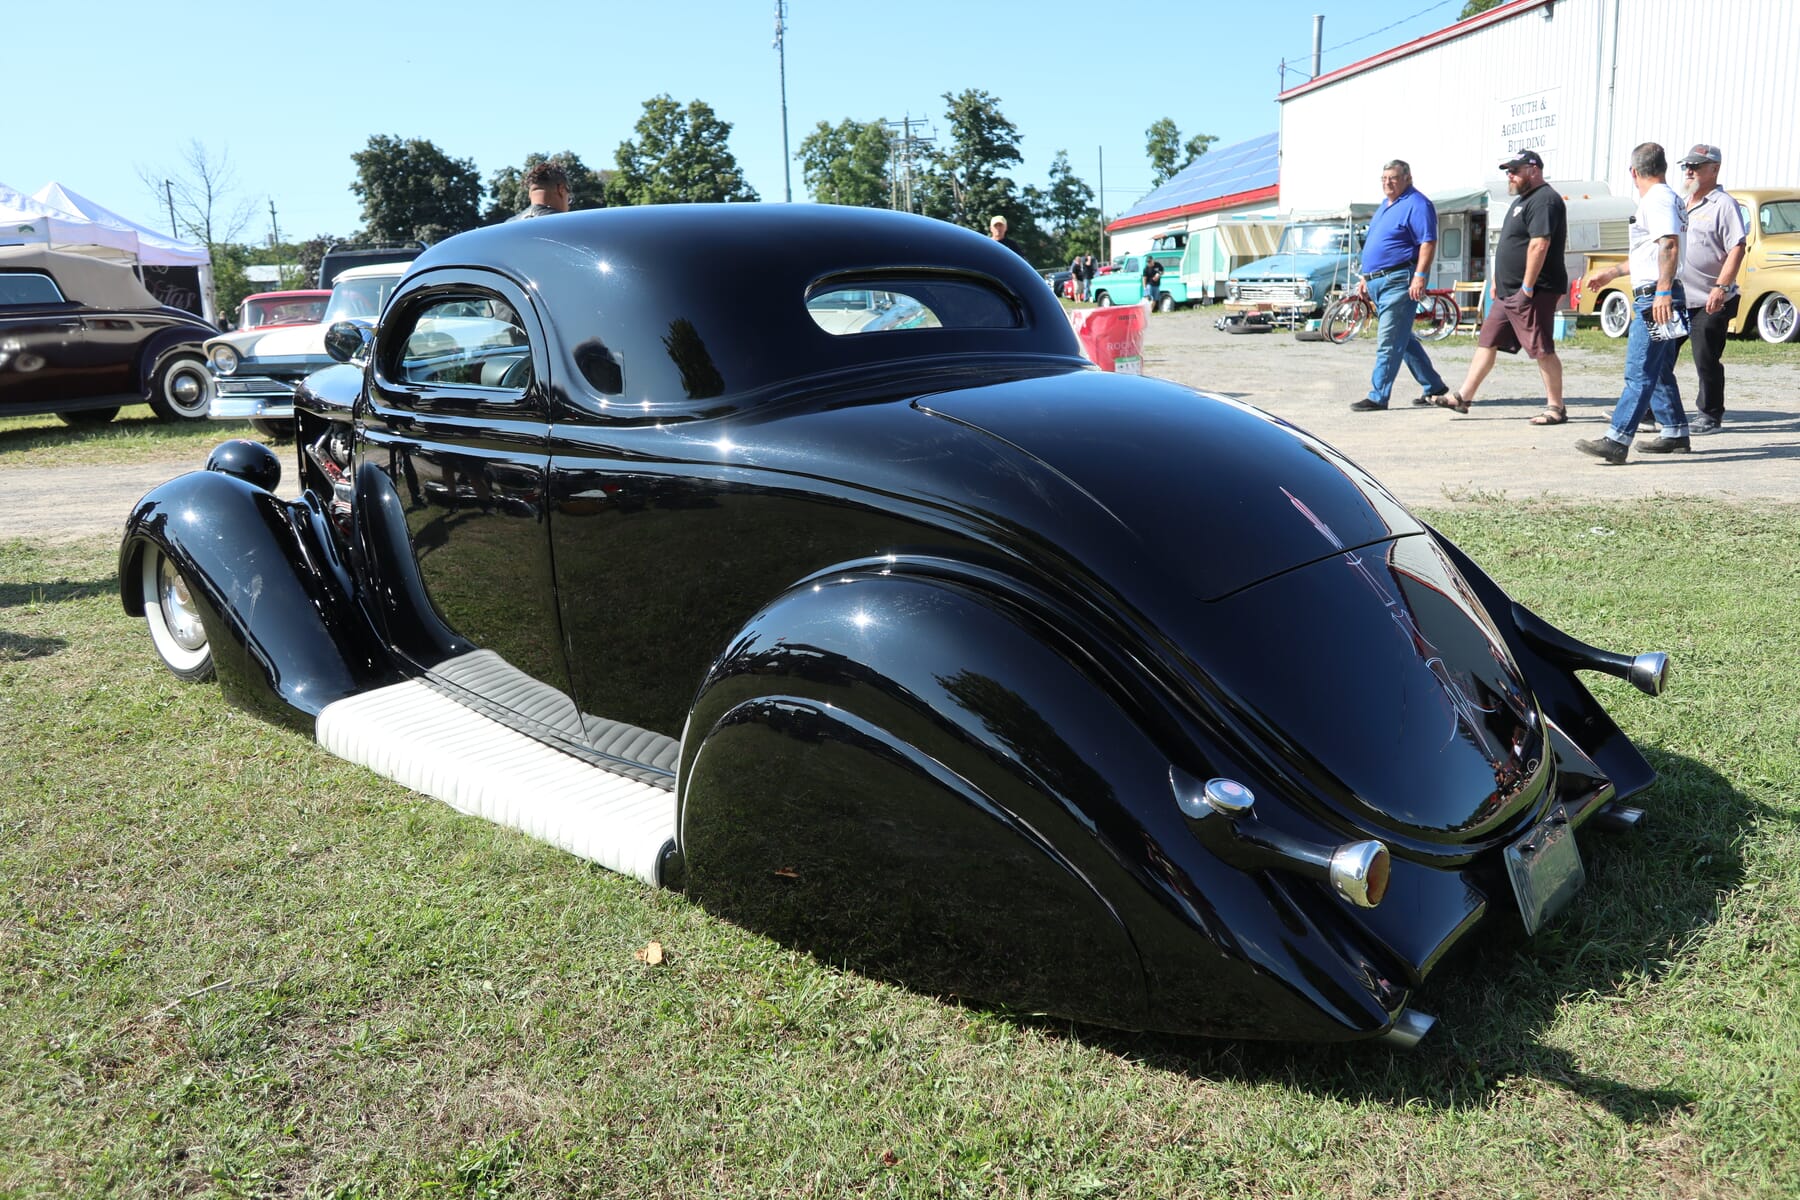 1936 Ford with shiny black paint and a reputation for being mean